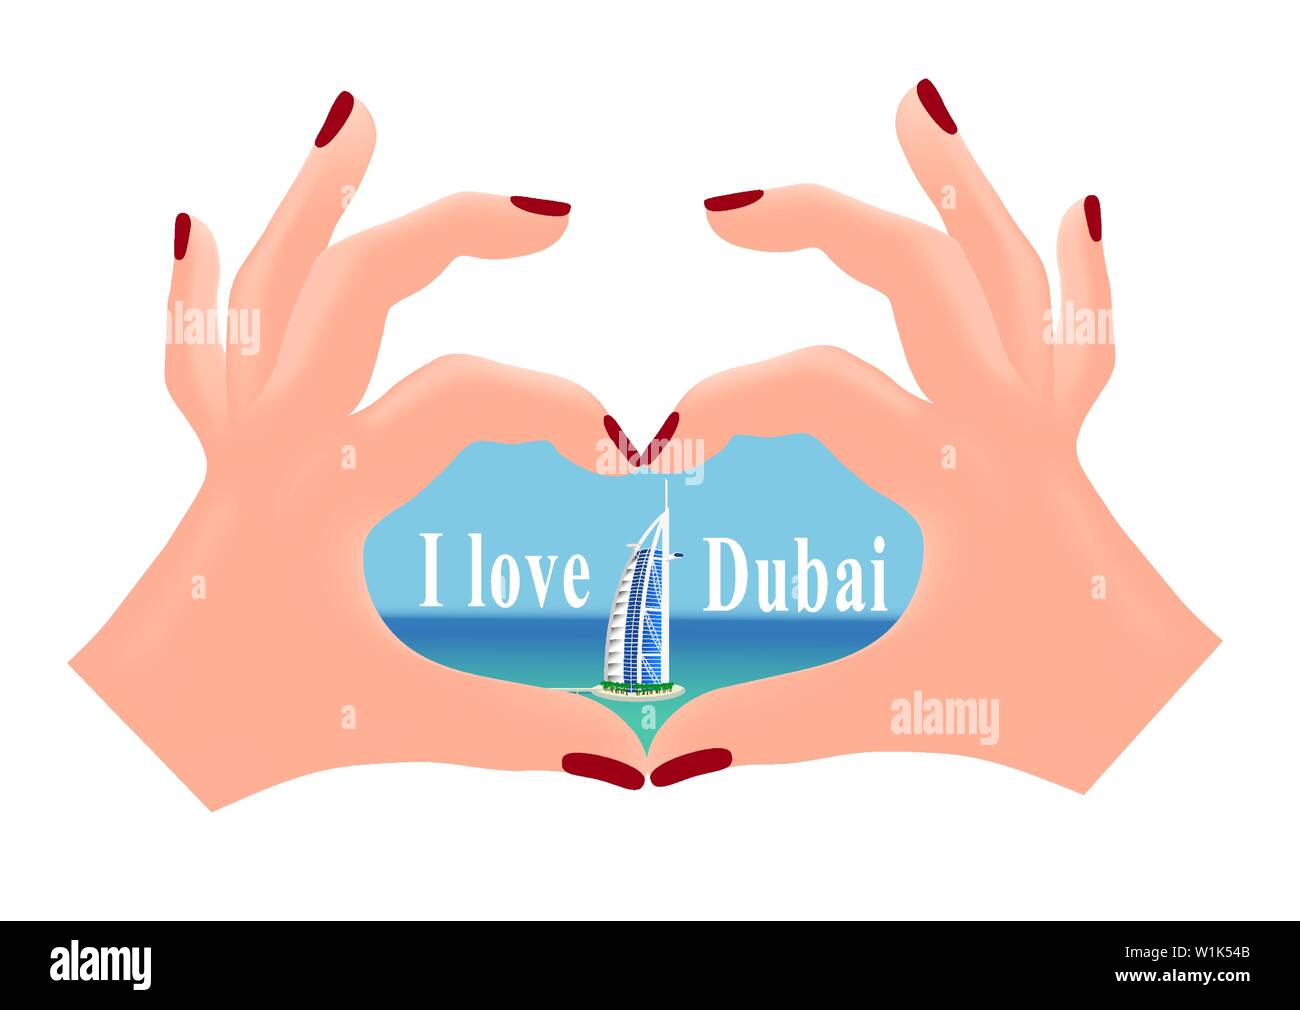 Hands in the shape of a heart show Burj Al Arab in Dubai. Isolated vector image with the ability to change text. Stock Vector